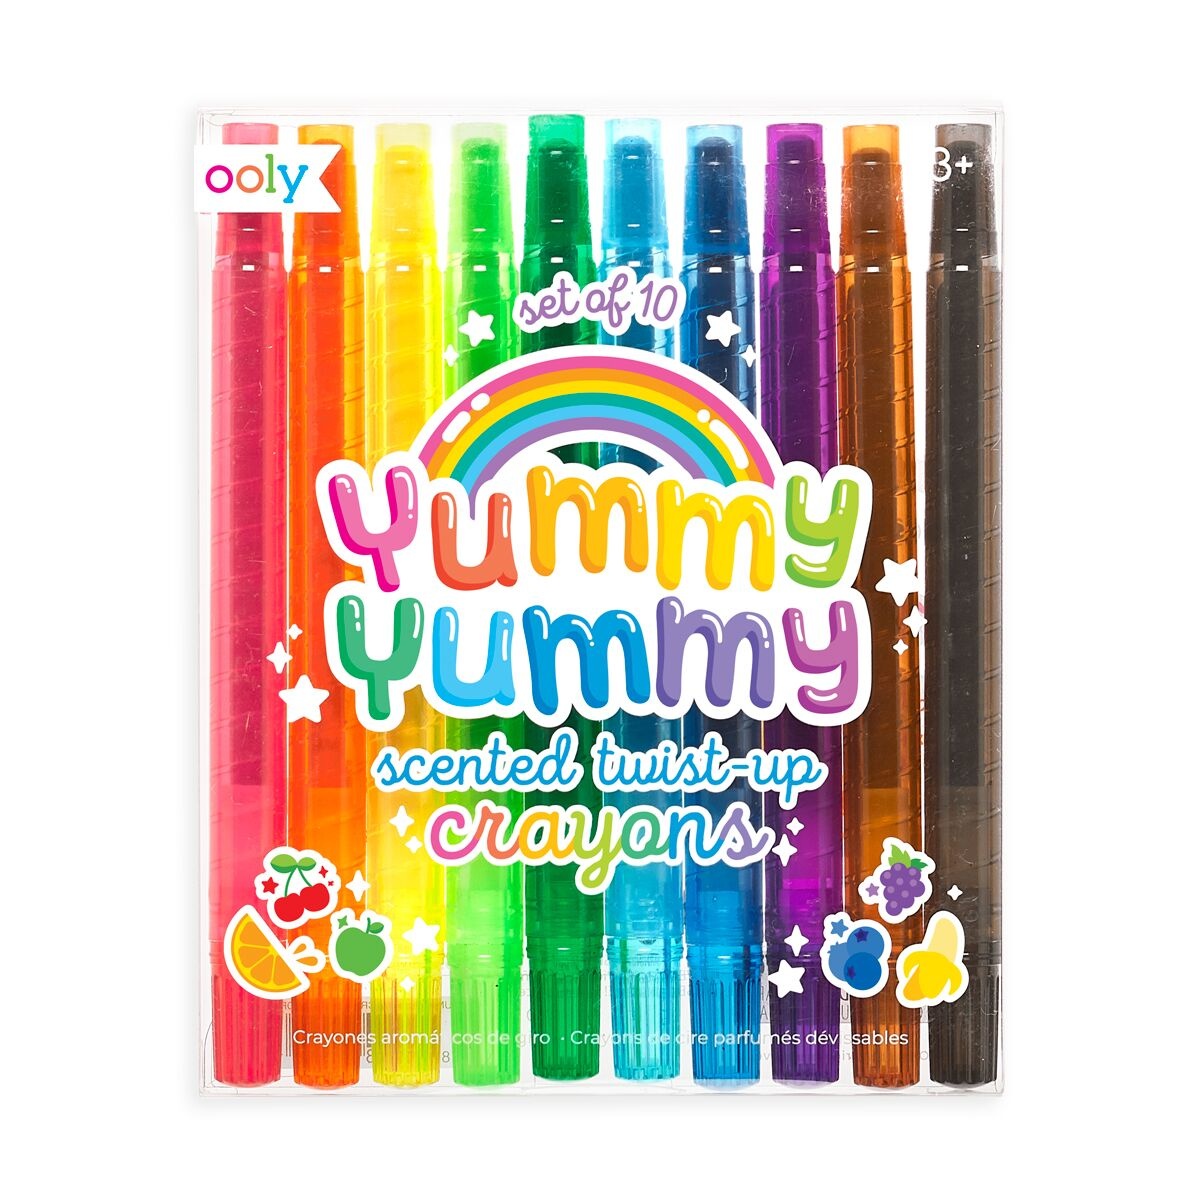 ooly Ooly Yummy Yummy Scented Twist Up Crayons